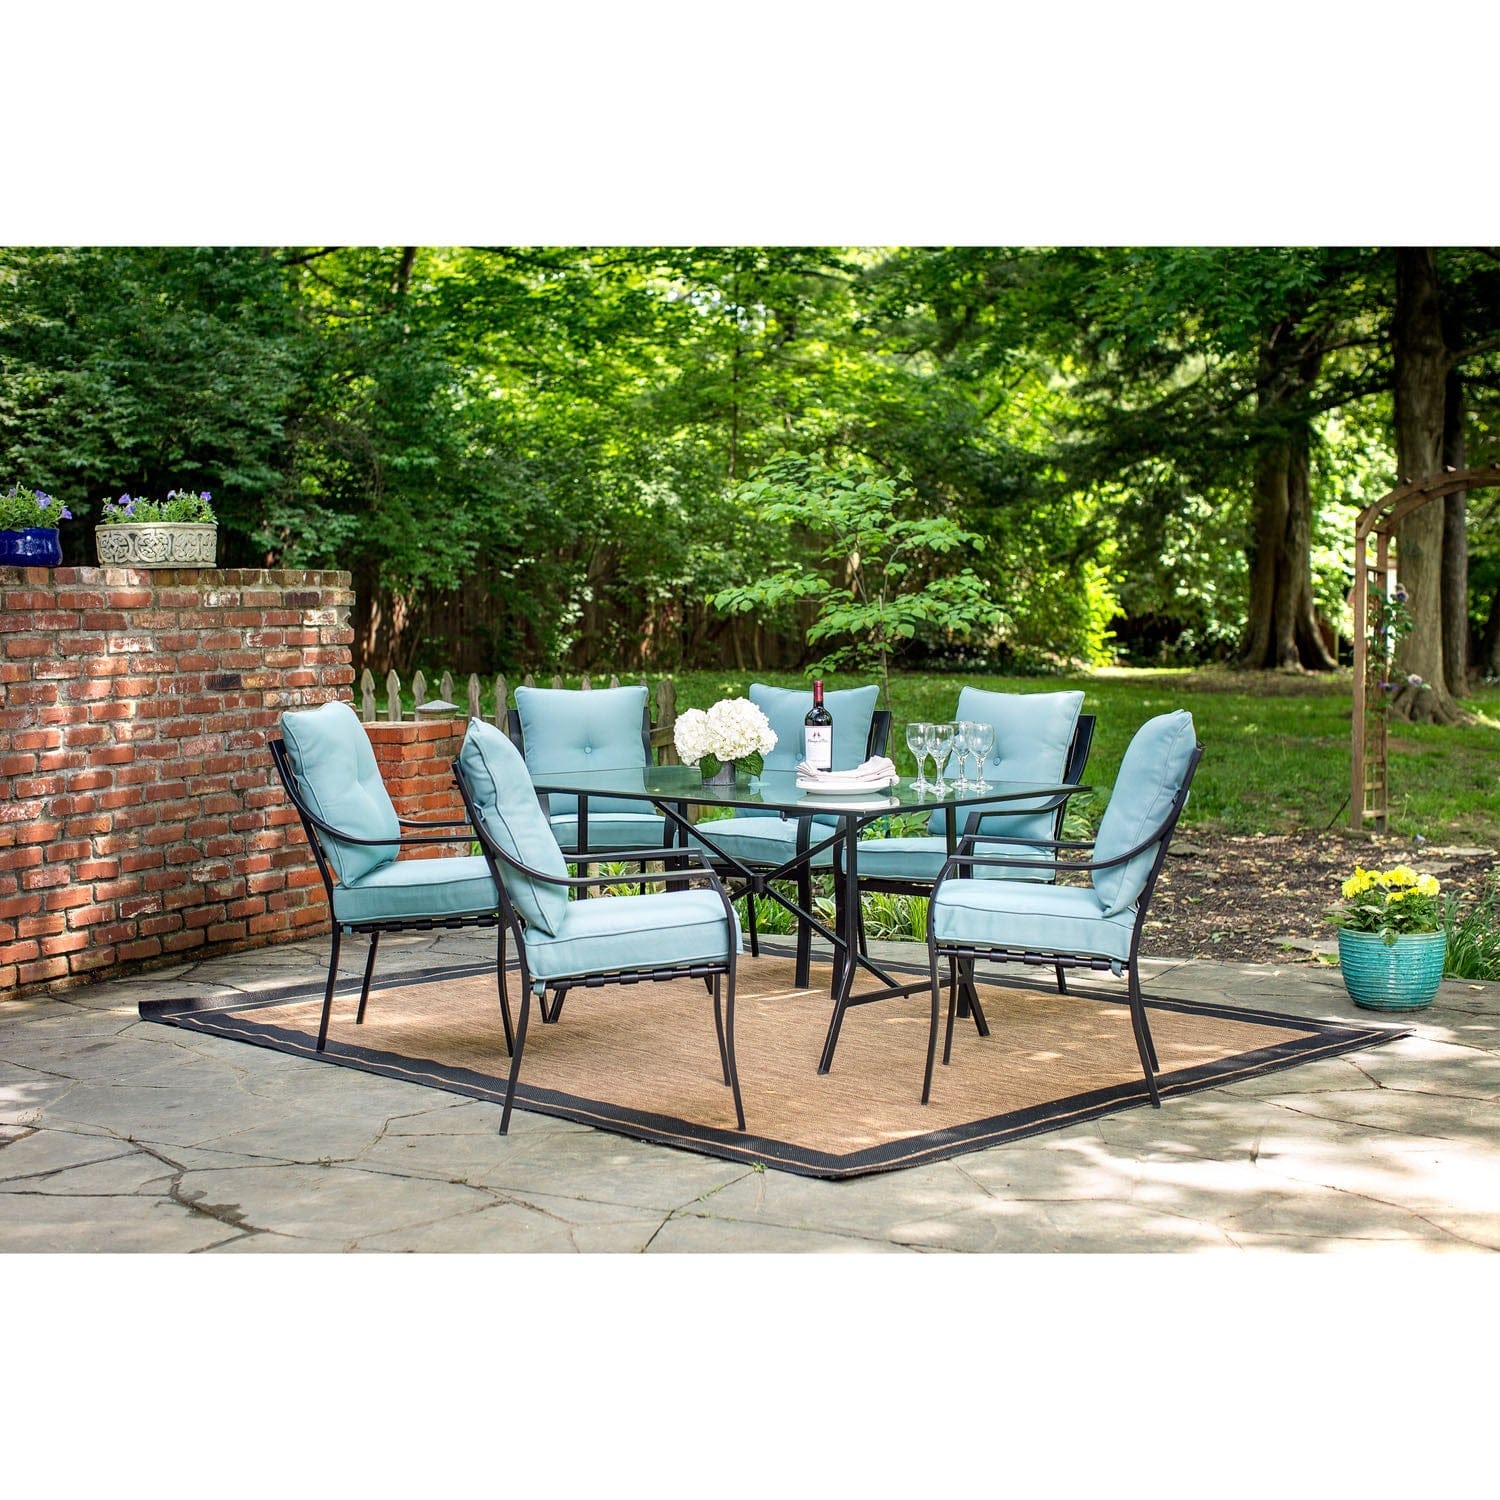 Hanover Outdoor Dining Set Hanover - 7 Piece Dining Set | 6 Stationary Chairs | 1 Dining Table | Gray/Ocean Blue | LAVDN7PC-BLU